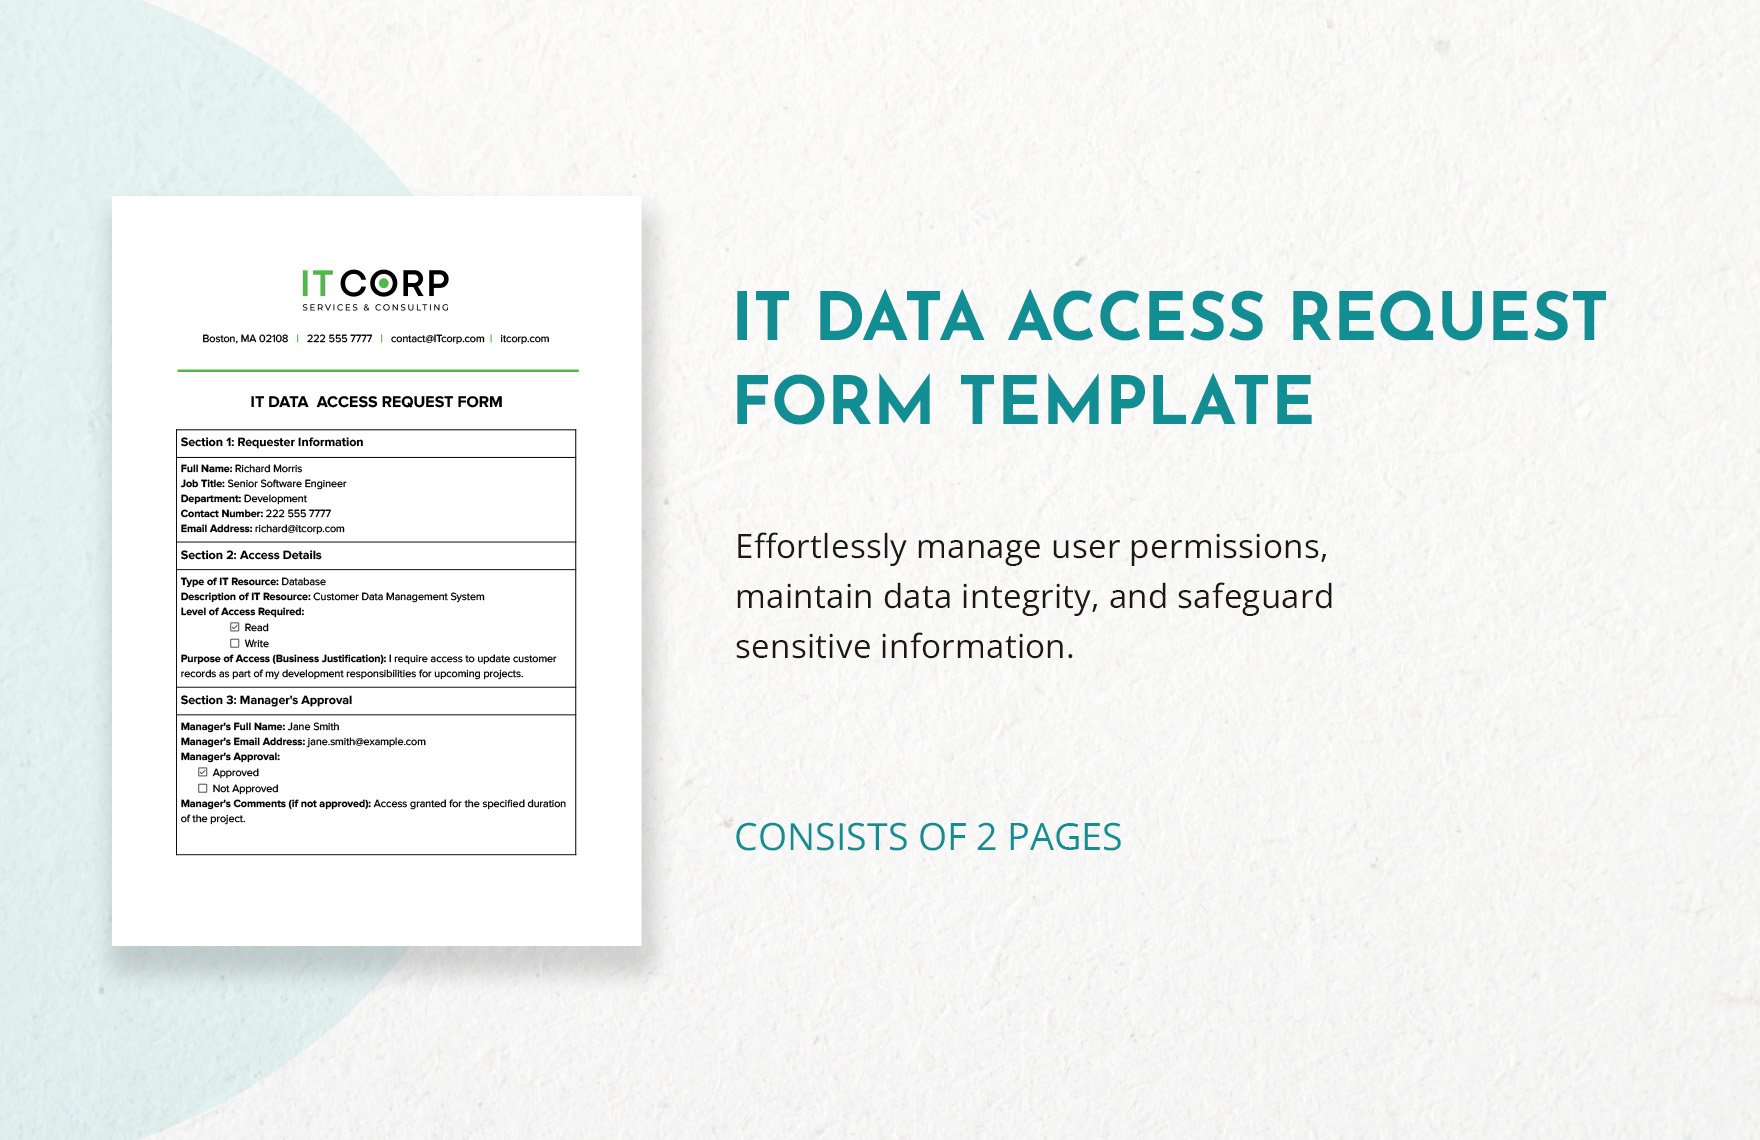 IT Data Access Request Form Template